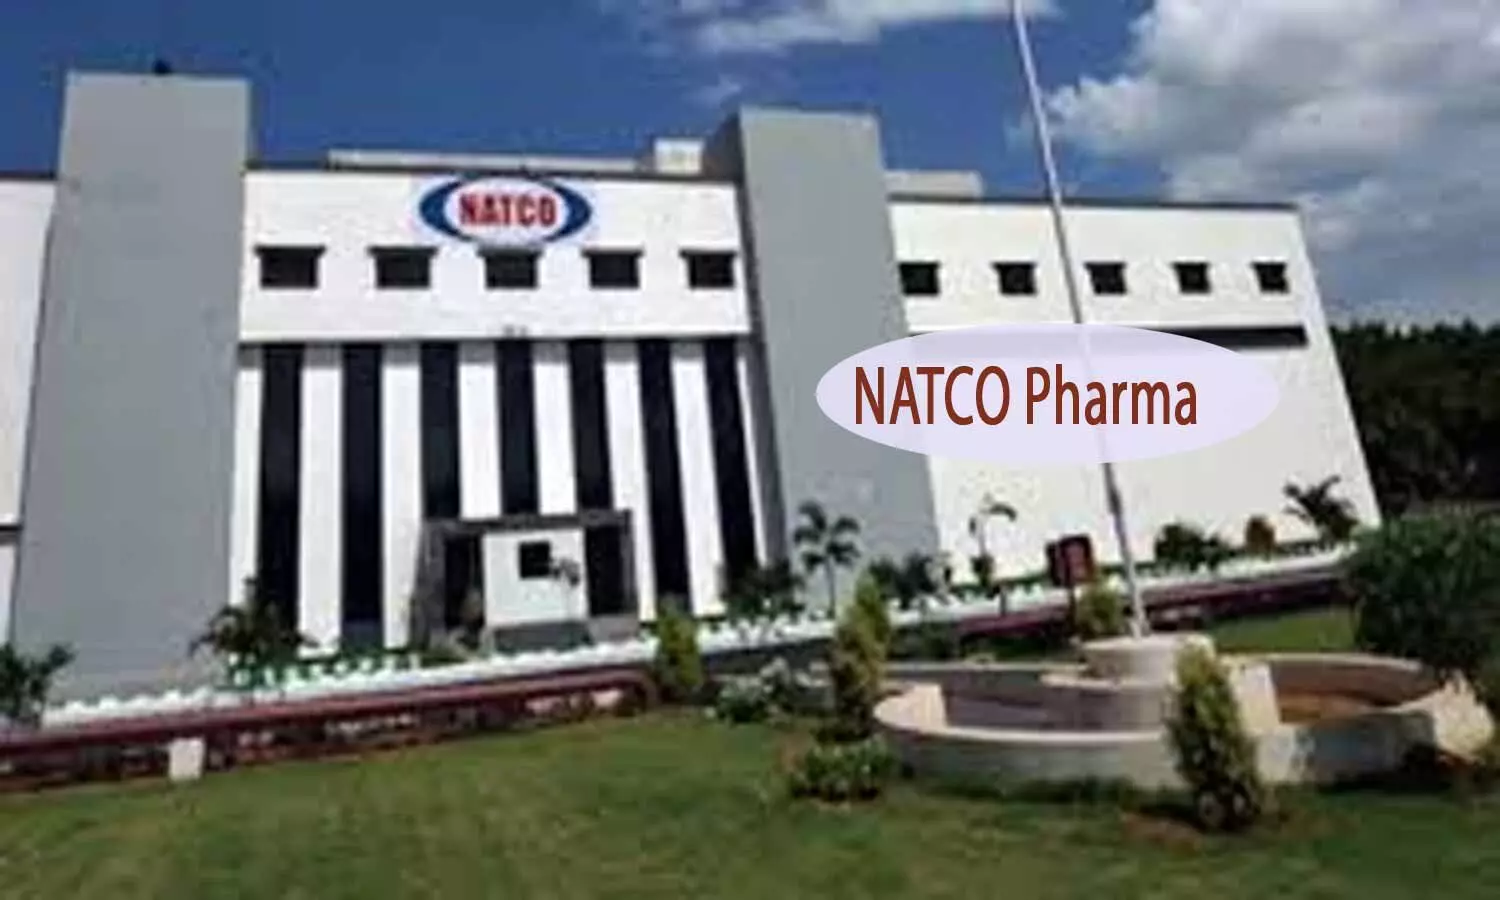 Natco Pharma launches Baricitinib in India without patent waiver approval